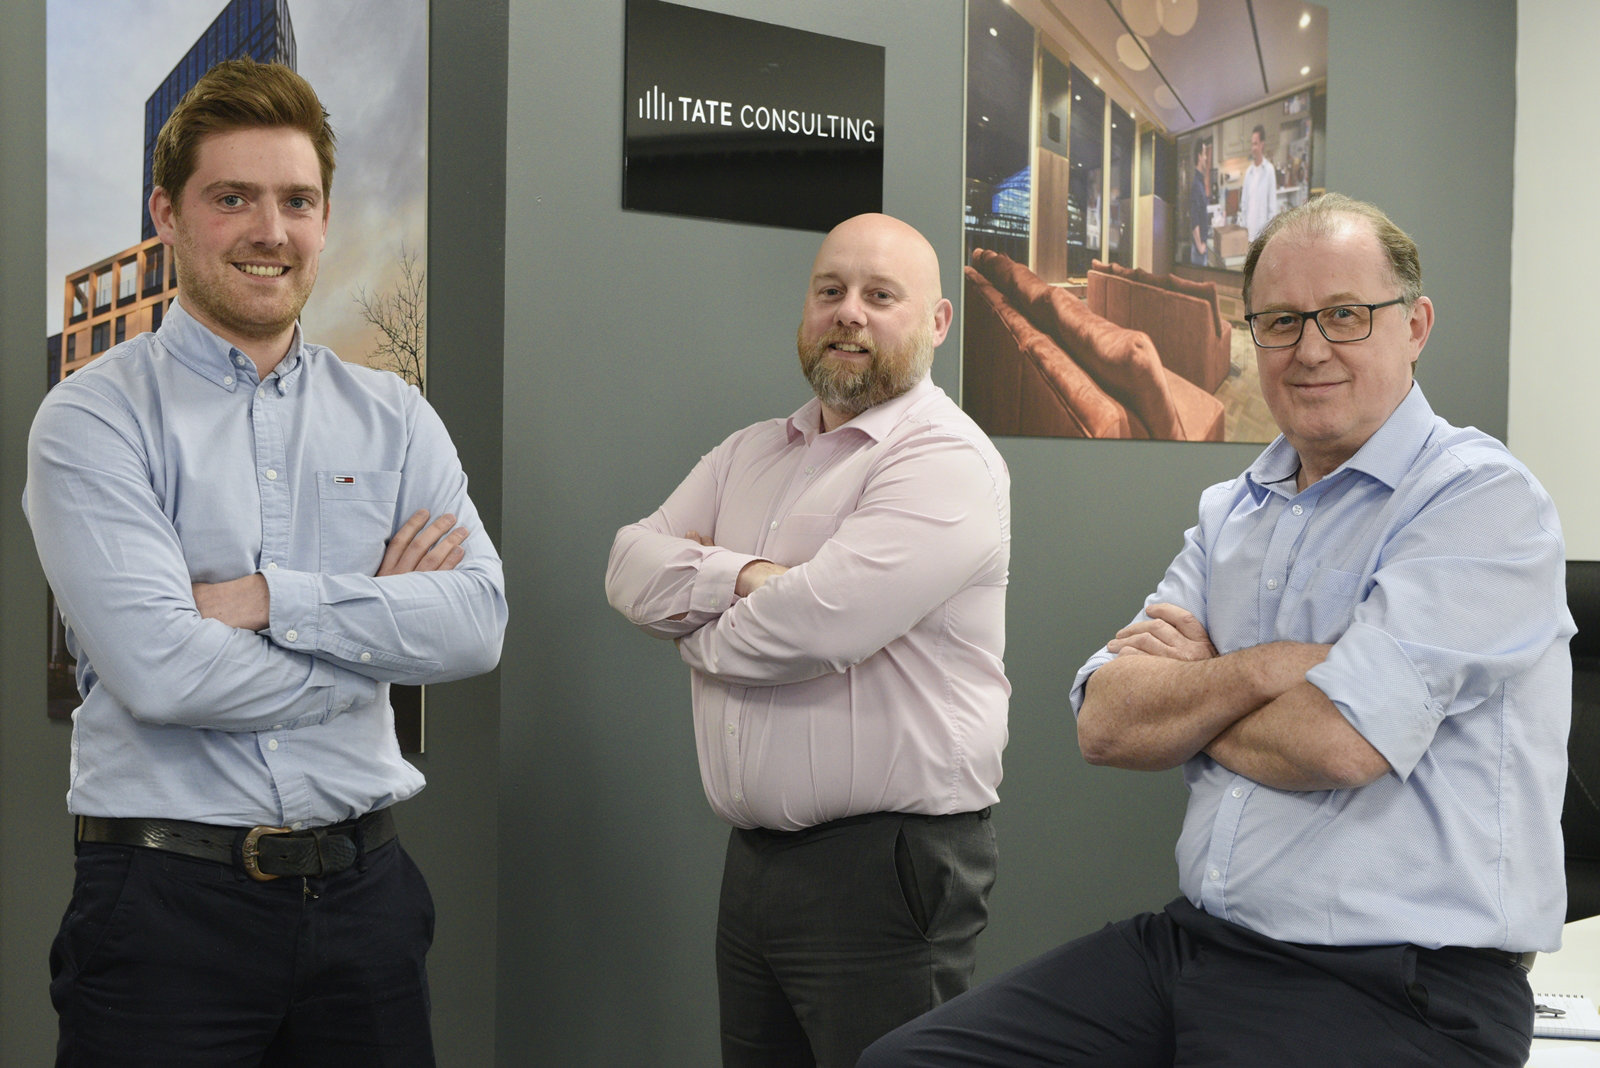 Left to right is Kevin Gallagher, Aaron Stevenson and Jim Lee from Tate Consulting